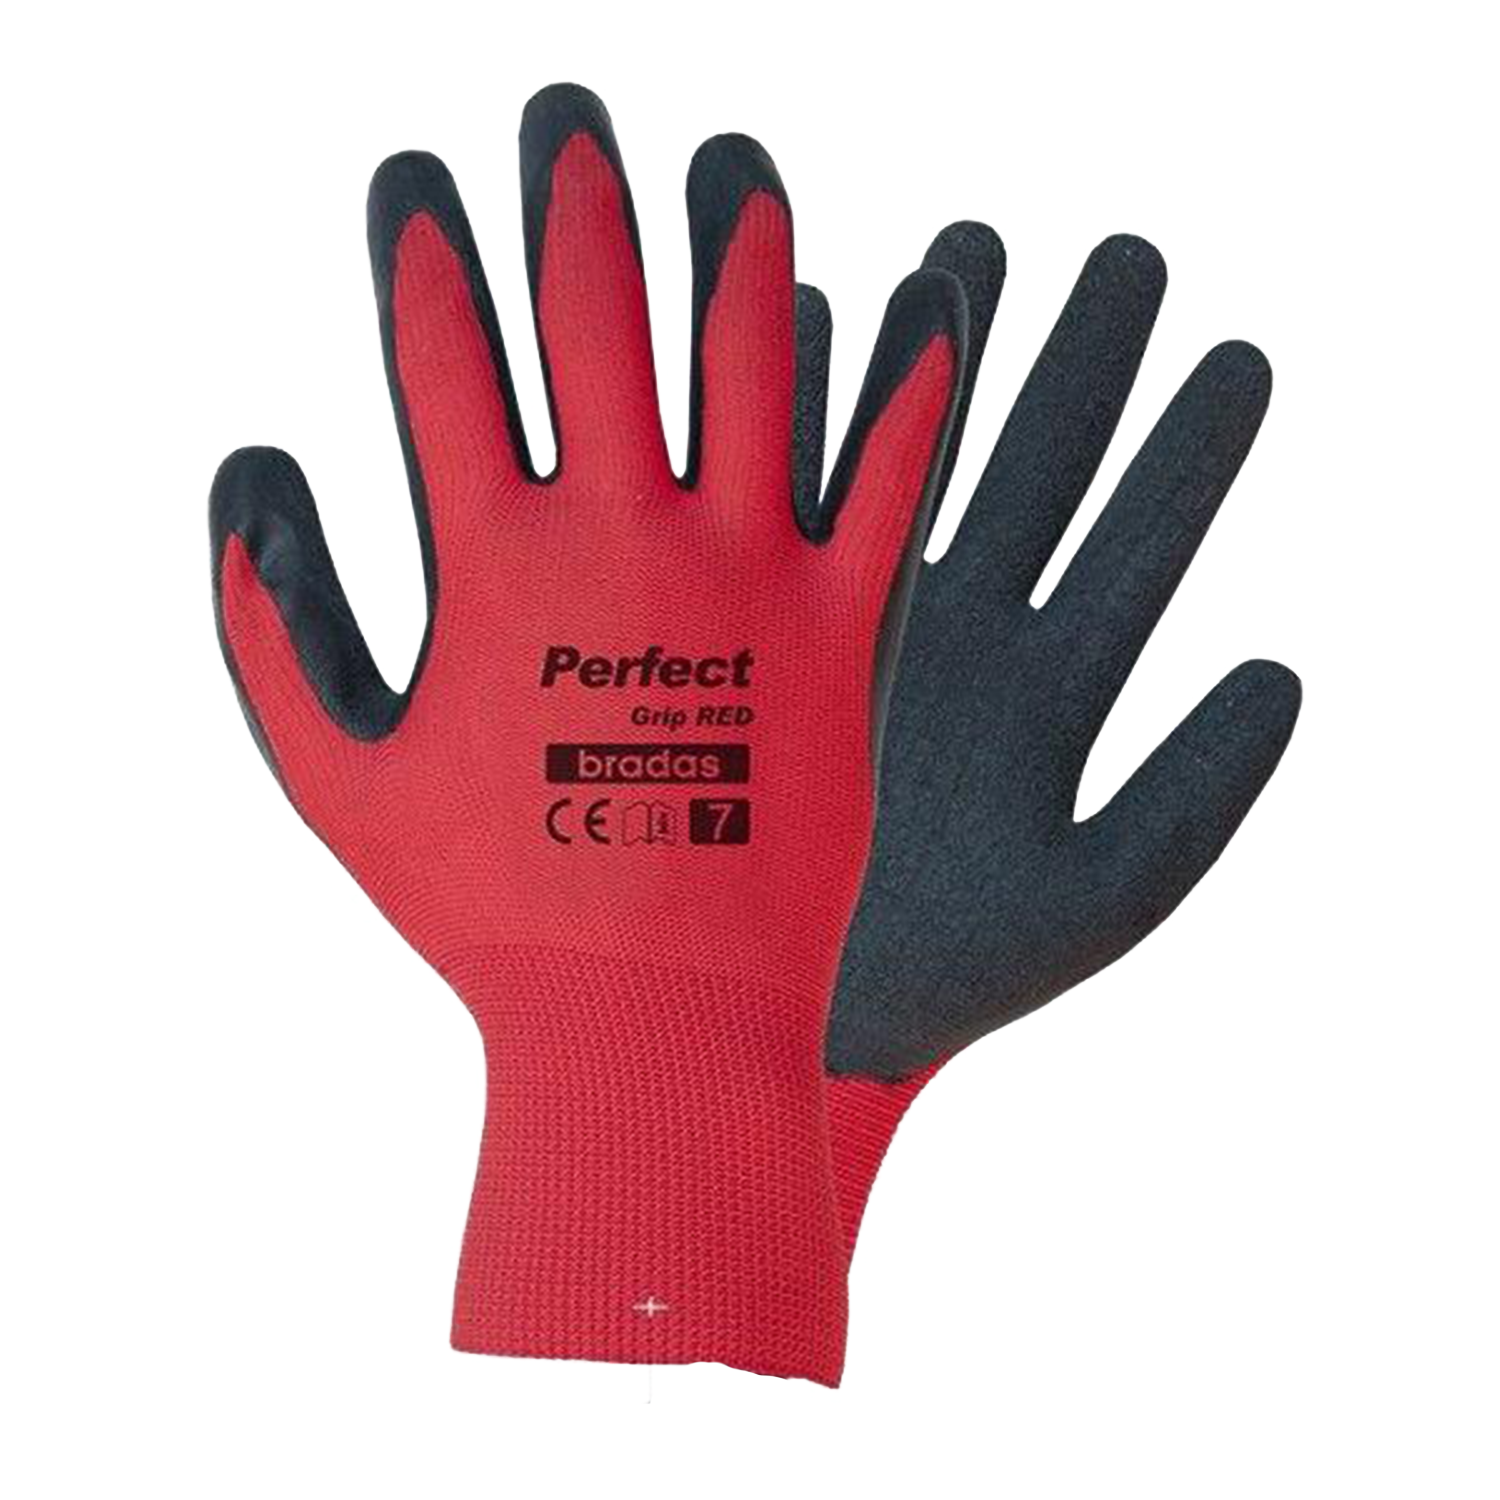 Garden gloves Perfect grip red, latex size 9